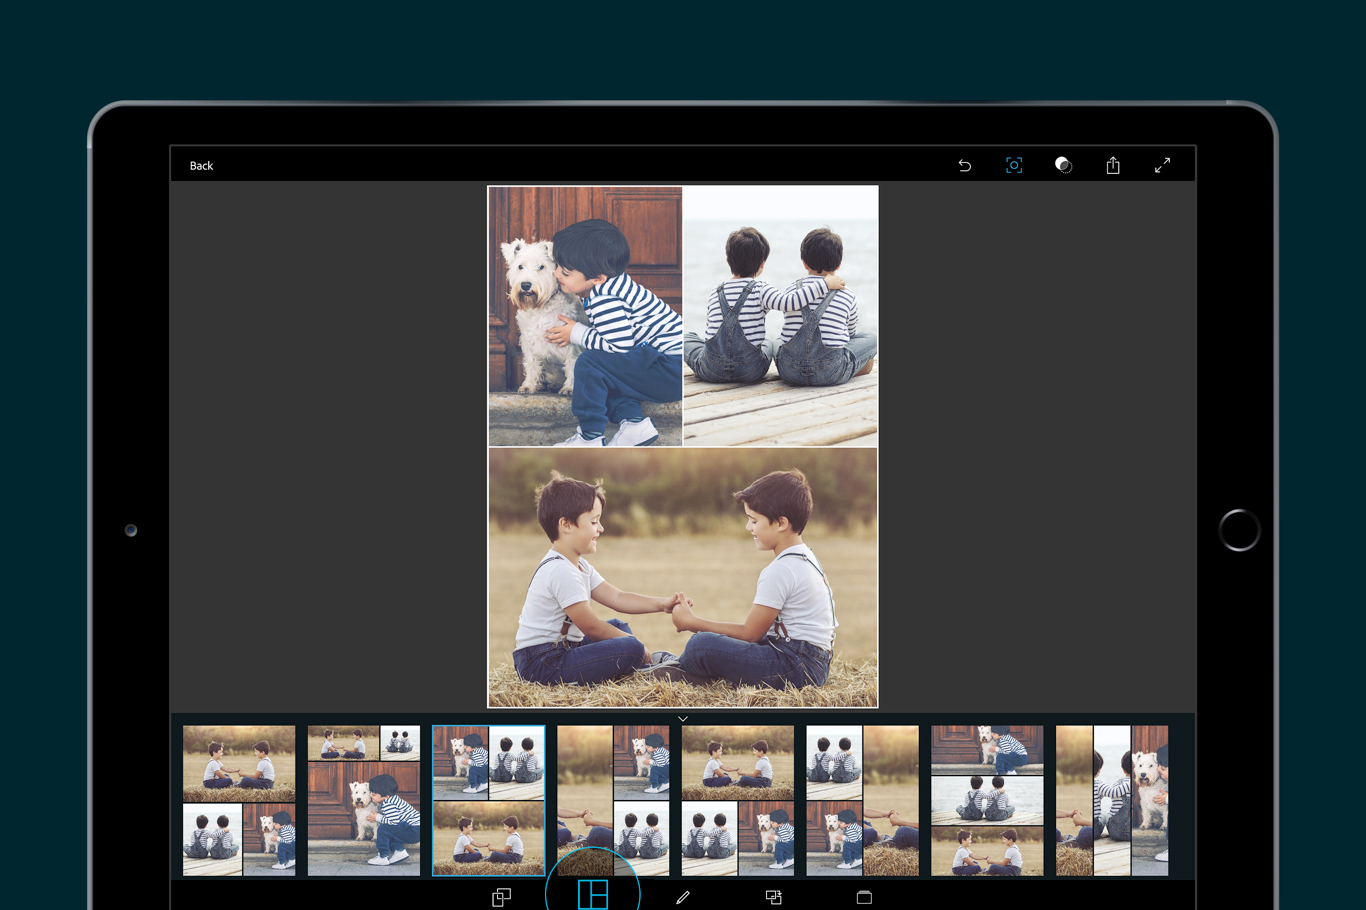 adobe lightroom android 22 raw support psx collages ipad copy